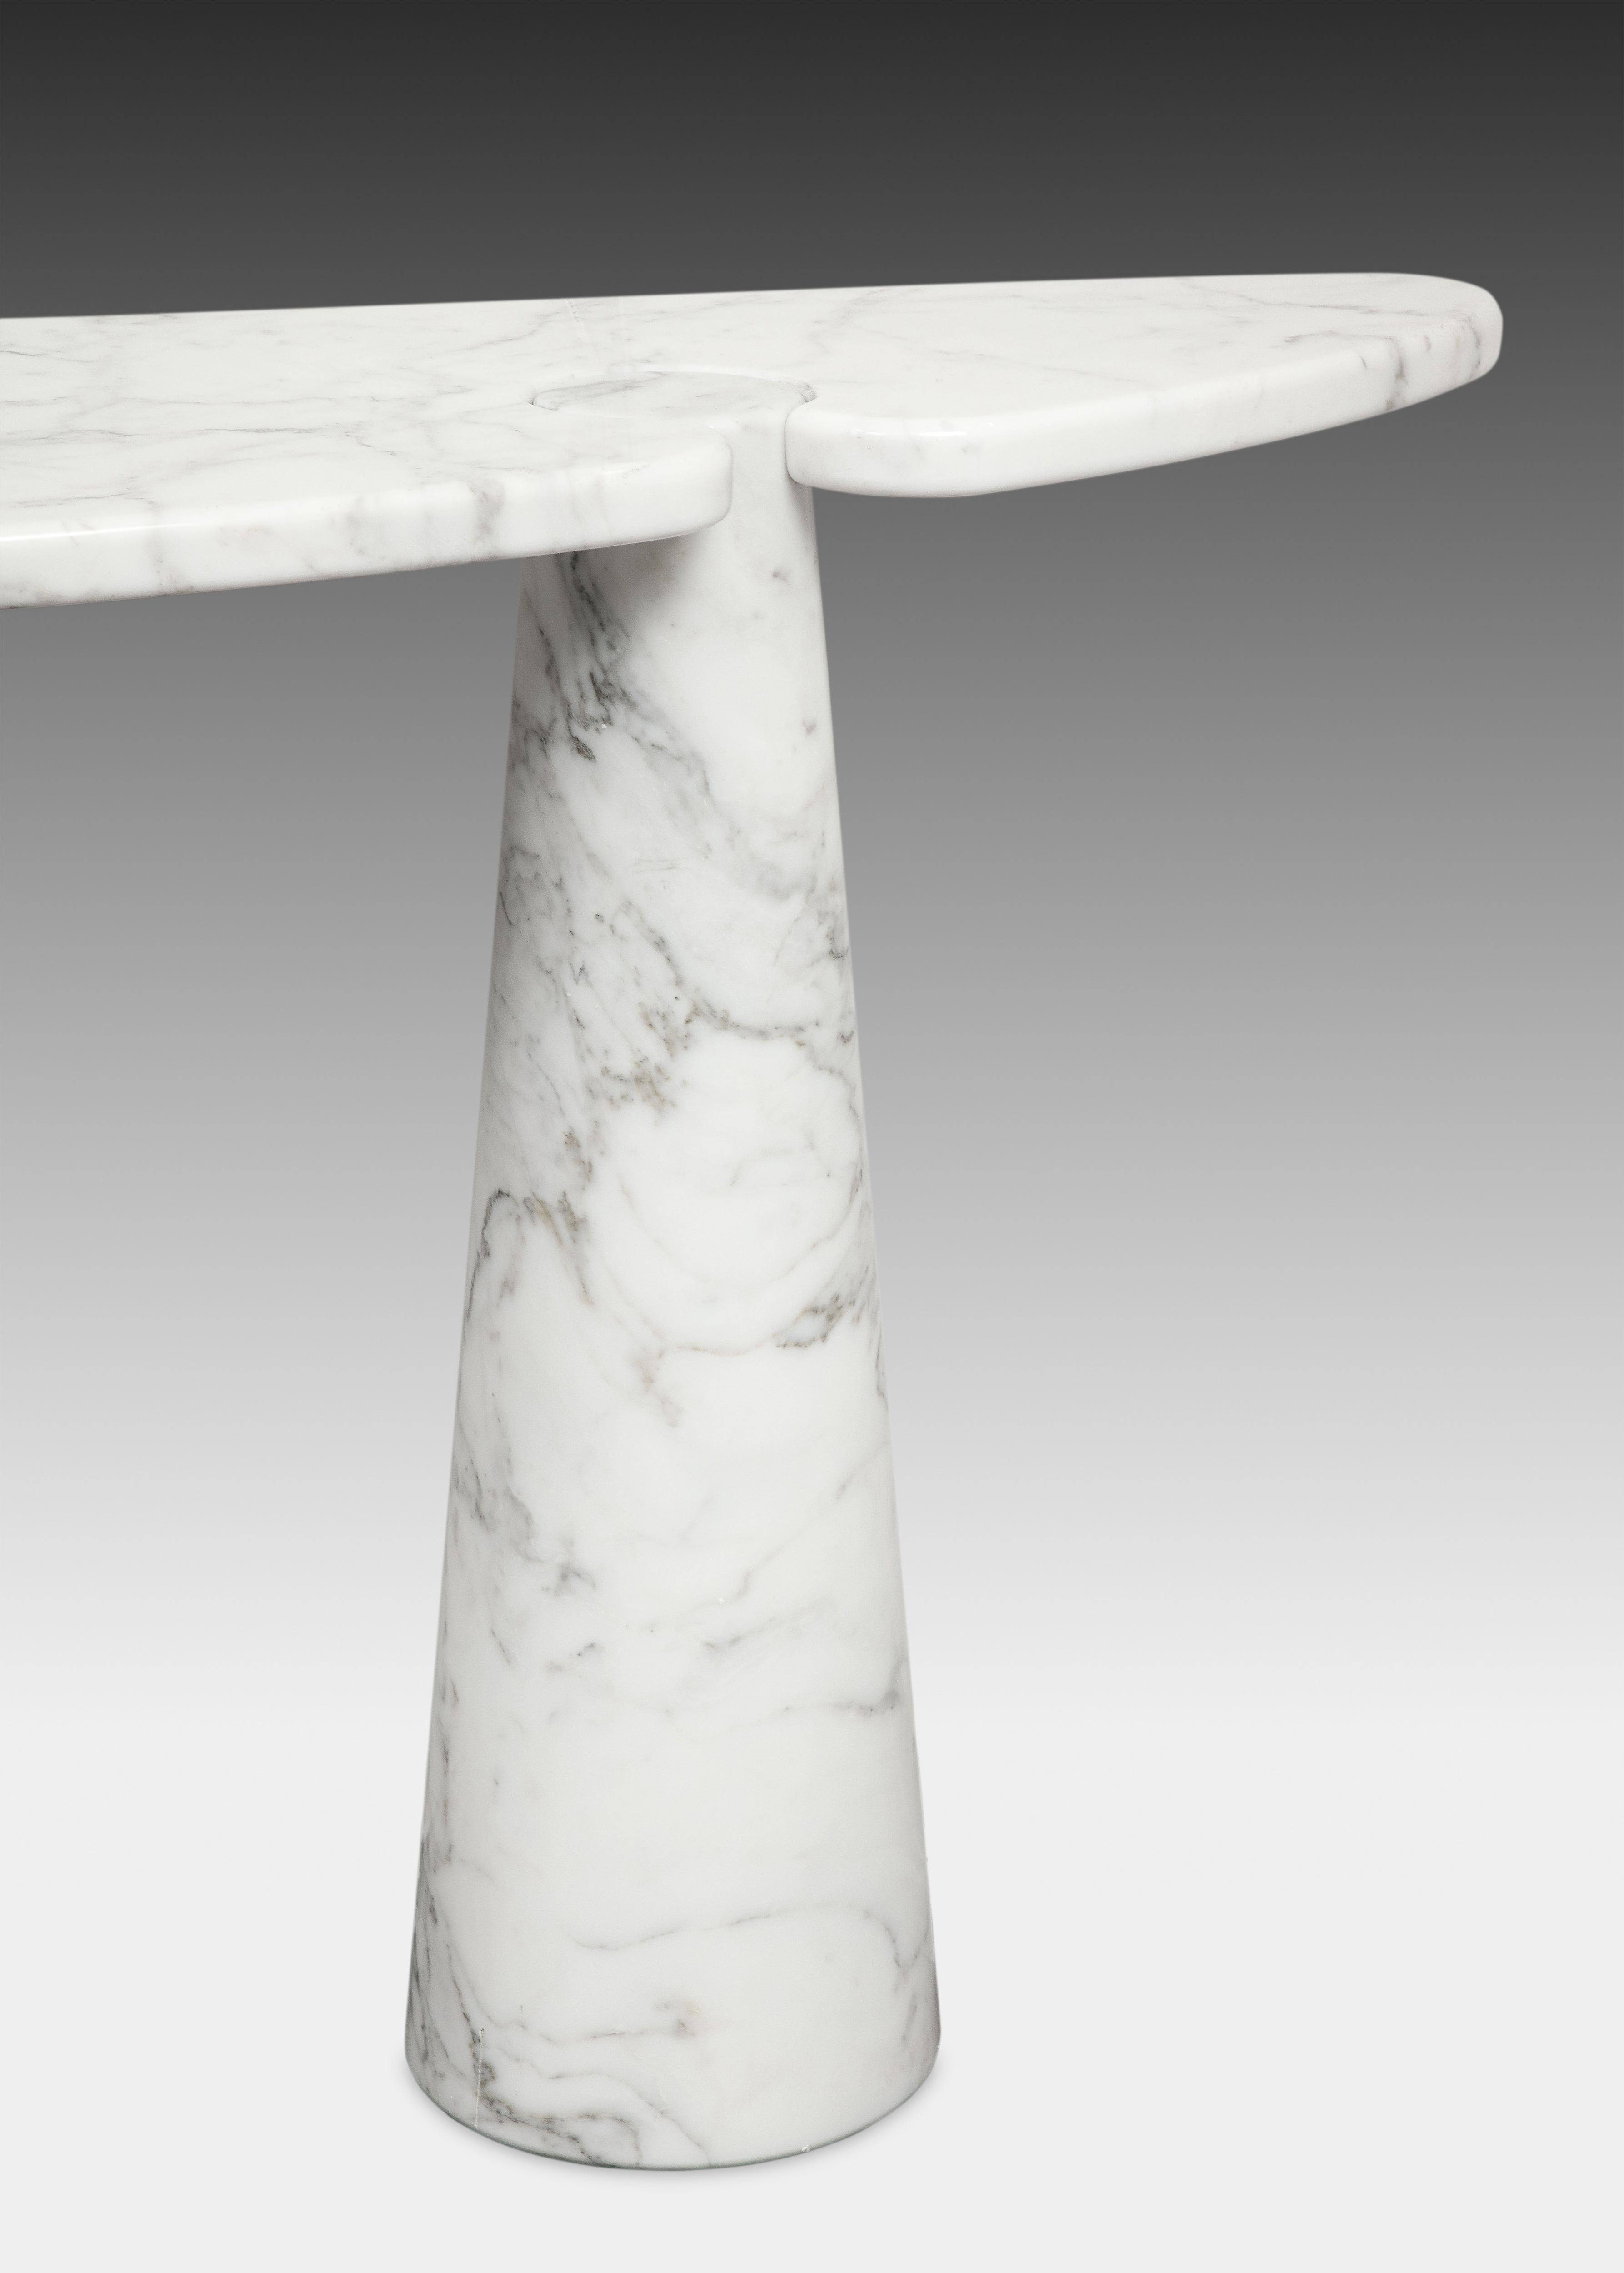 Polished Angelo Mangiarotti Eros Series Pair of Carrara Marble Consoles, Skipper Label For Sale